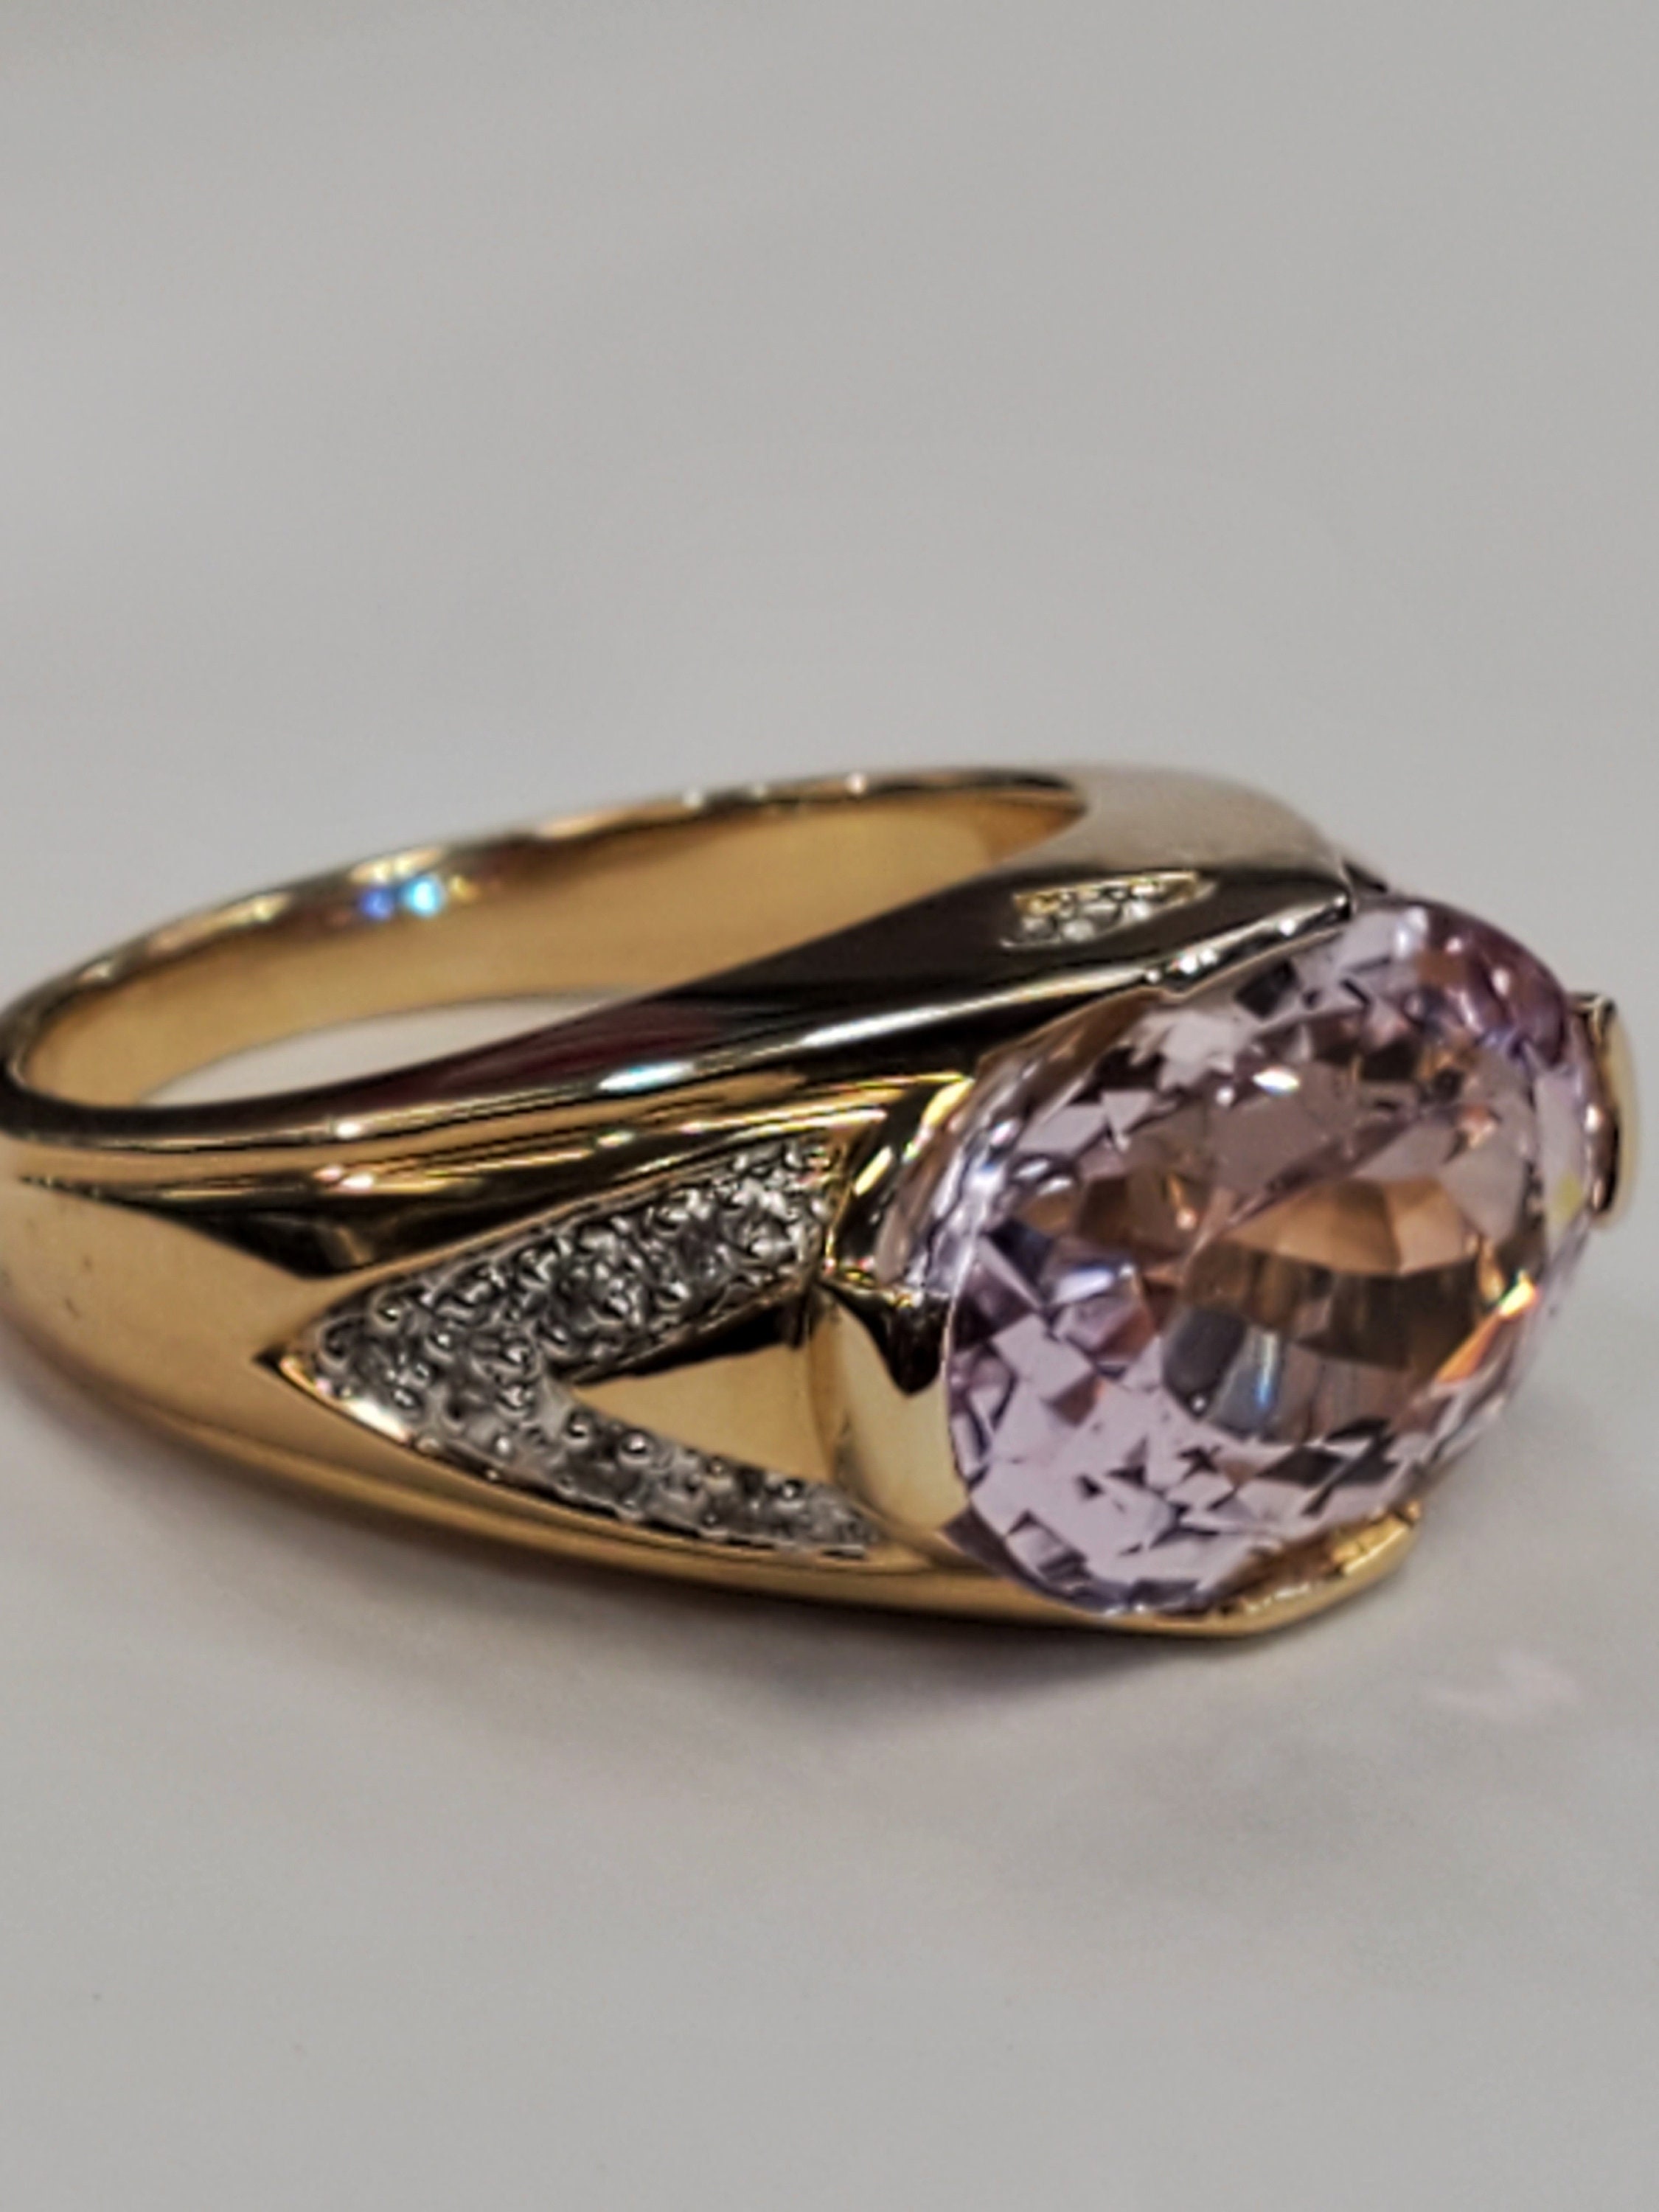 Product Image for Oval Kunzite and diamond ring 14k yellow gold size 6.5